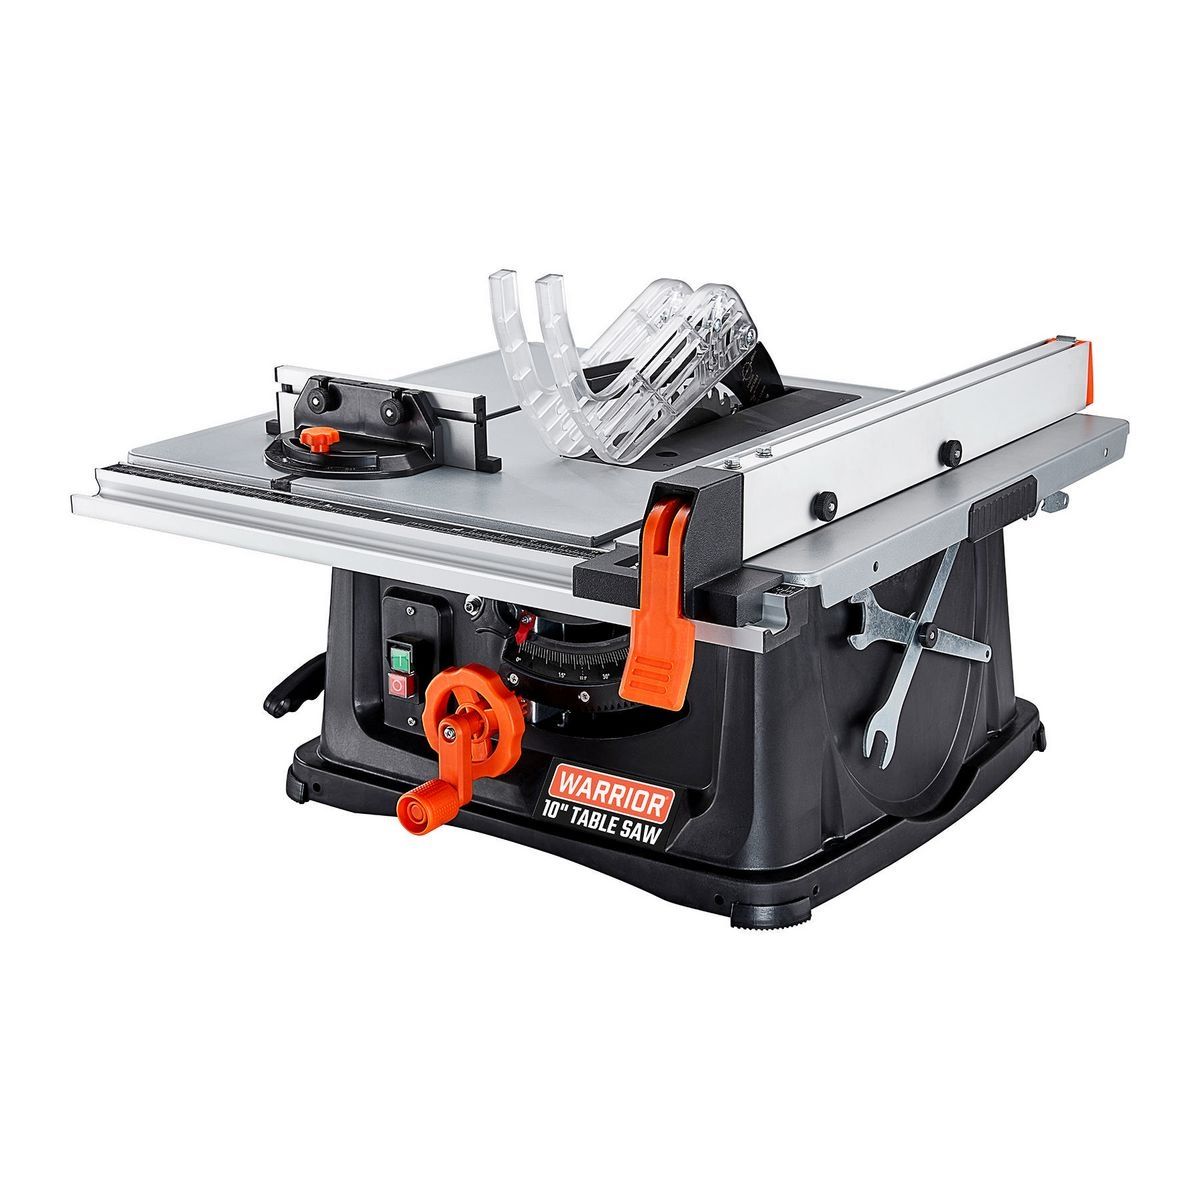 "Best Practices for Storing Table Saw"